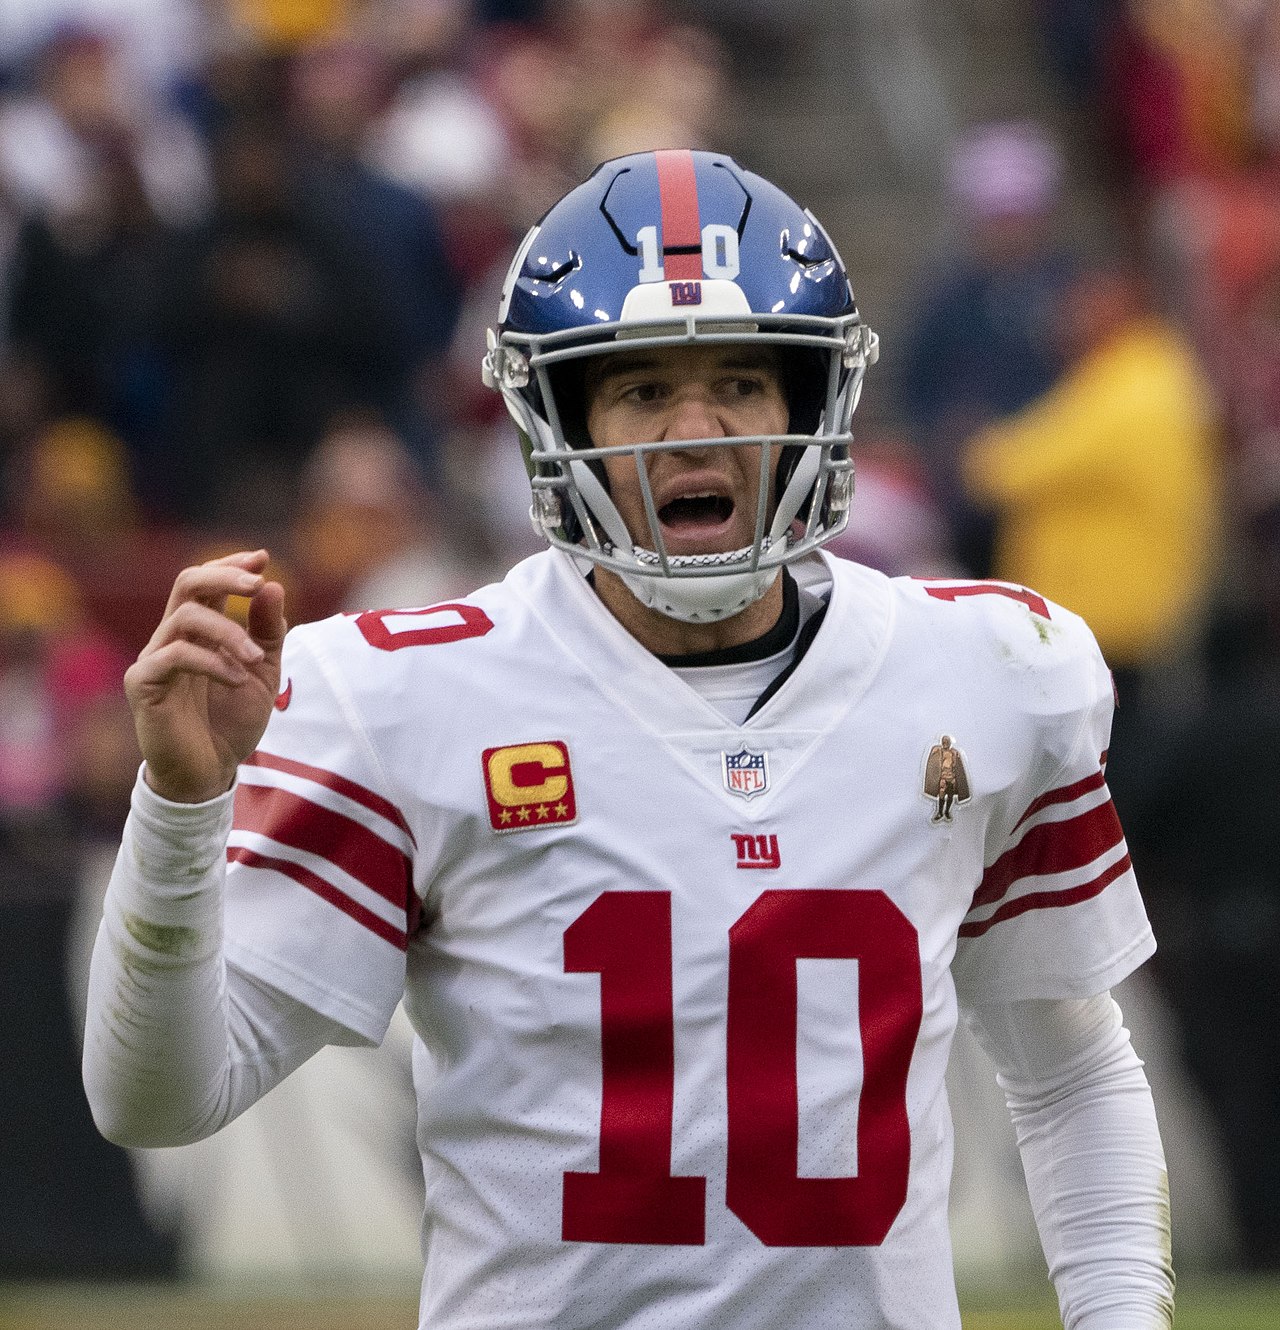 Will The Giants Target A Quarterback In April?